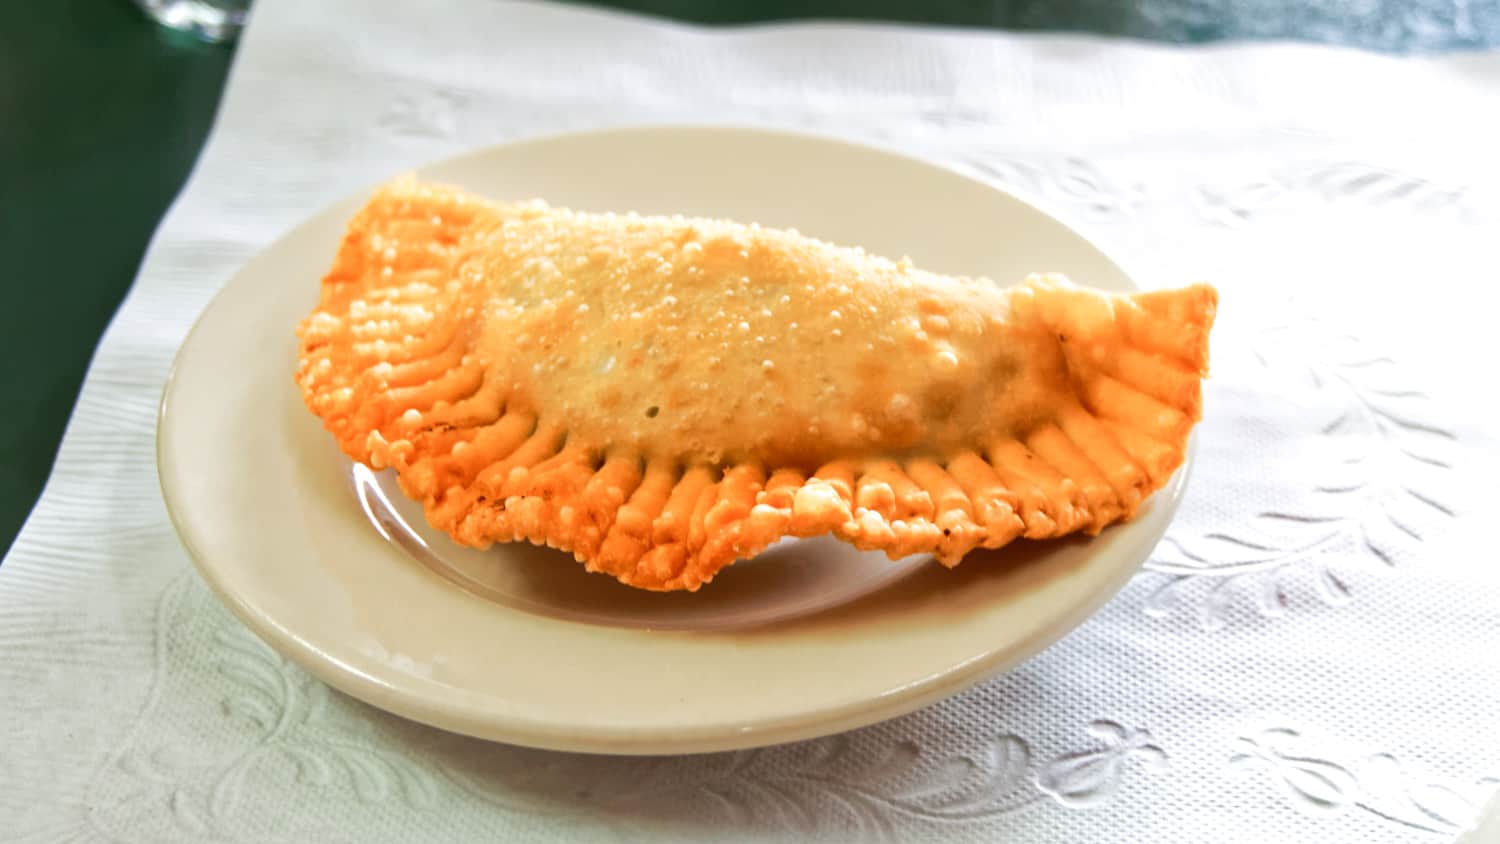 Pastelitos are small pastels or empanadas in Honduran cuisine and filled with bean, meats or cheese.